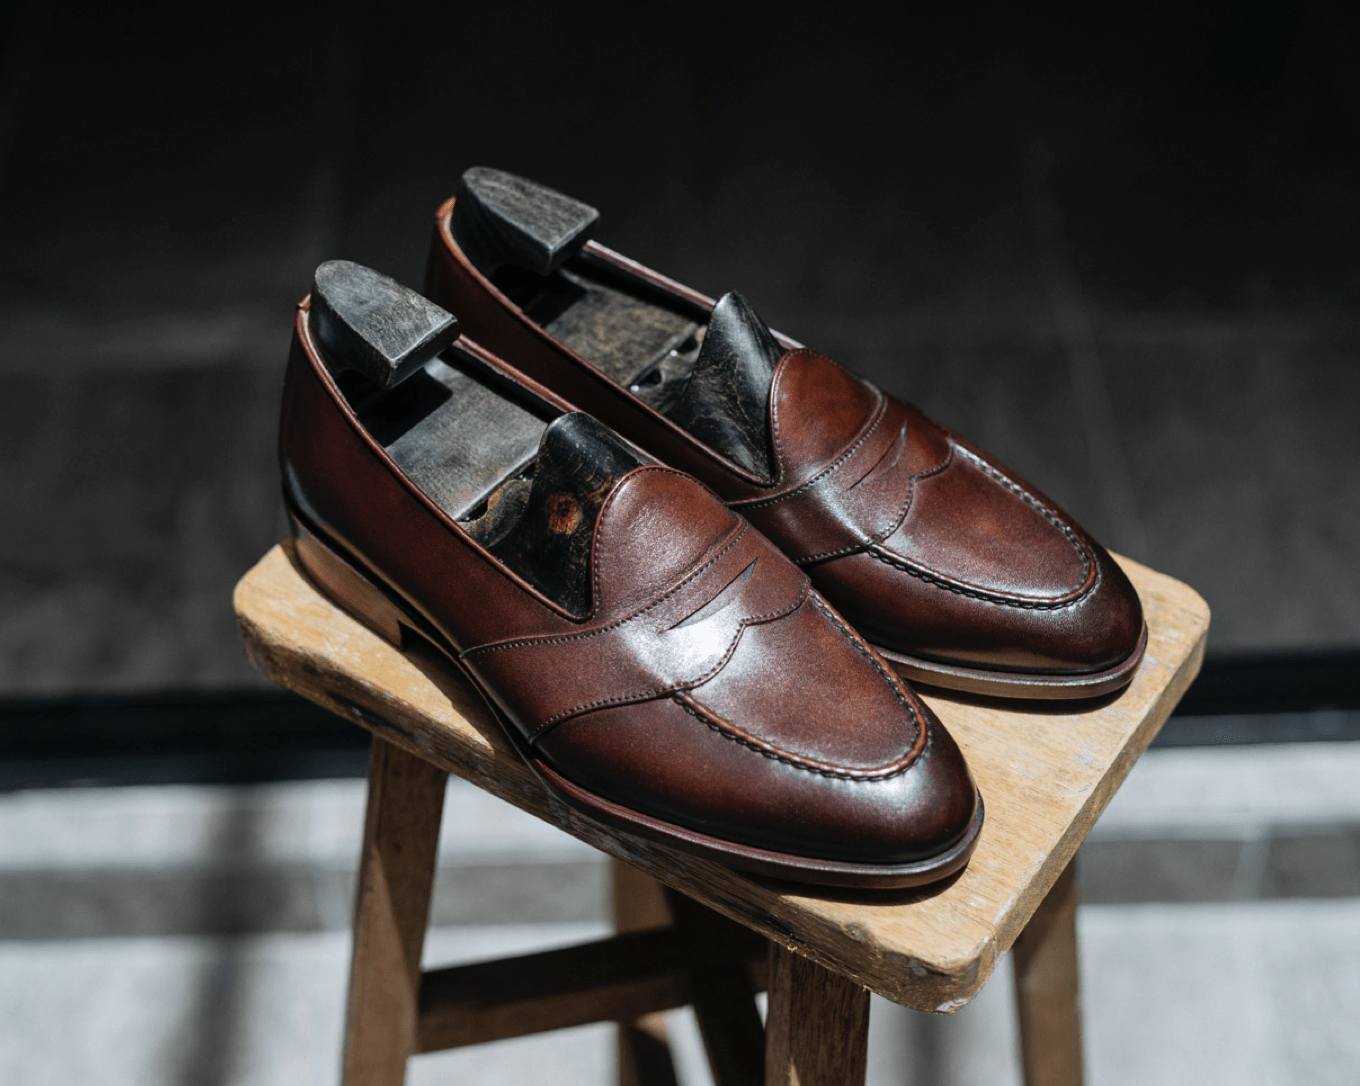 CNES Shoemaker: New Collection